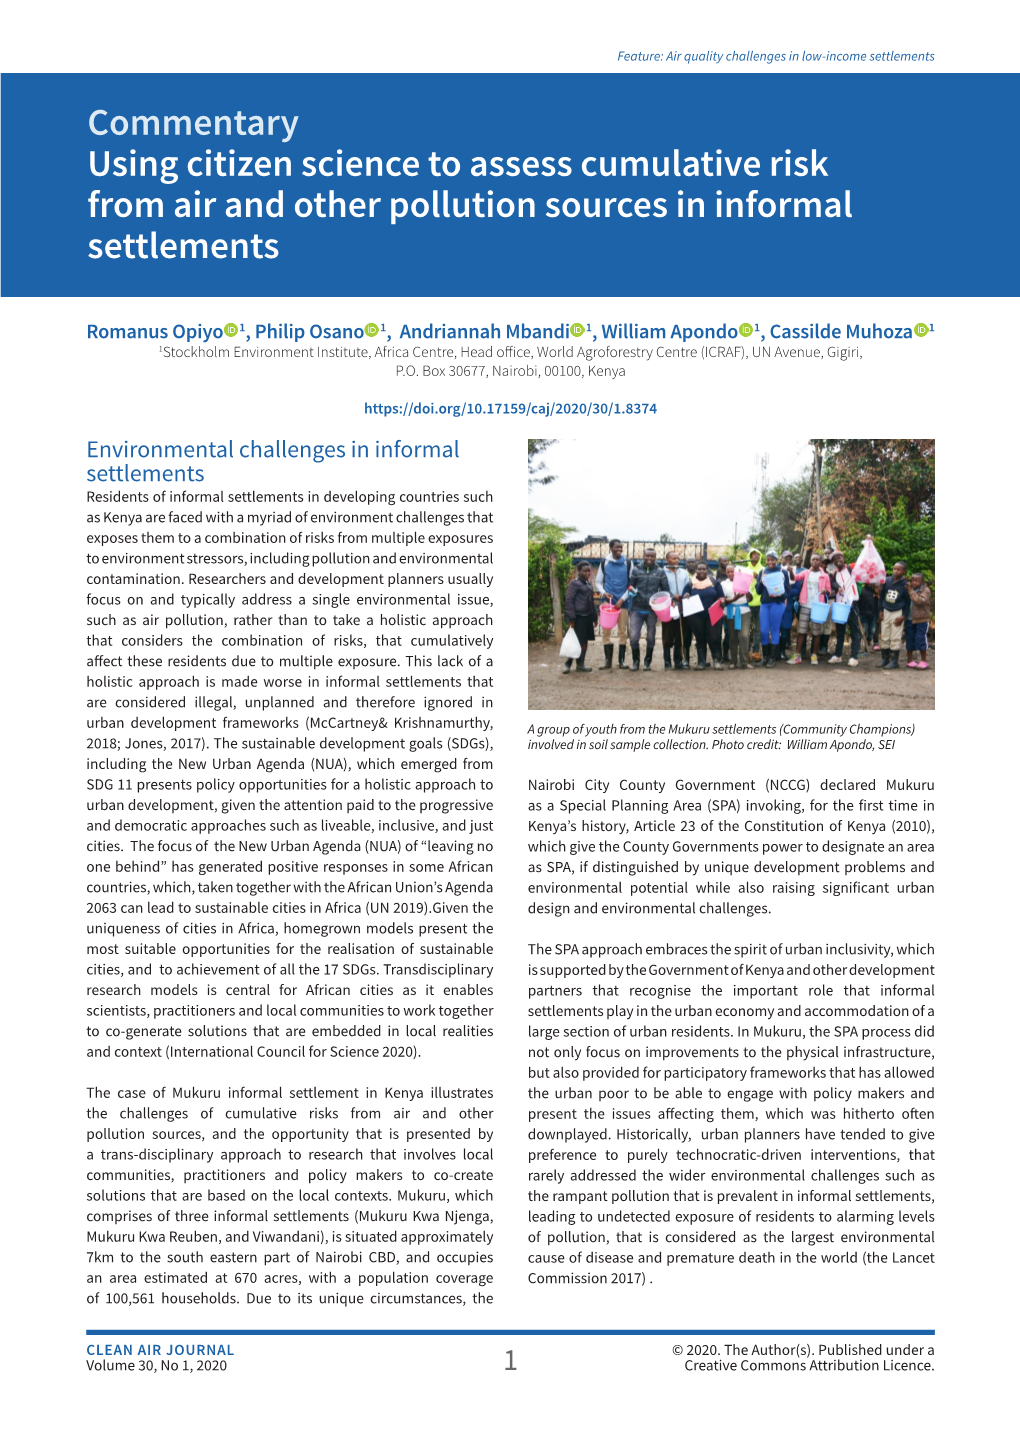 Commentary Using Citizen Science to Assess Cumulative Risk from Air and Other Pollution Sources in Informal Settlements